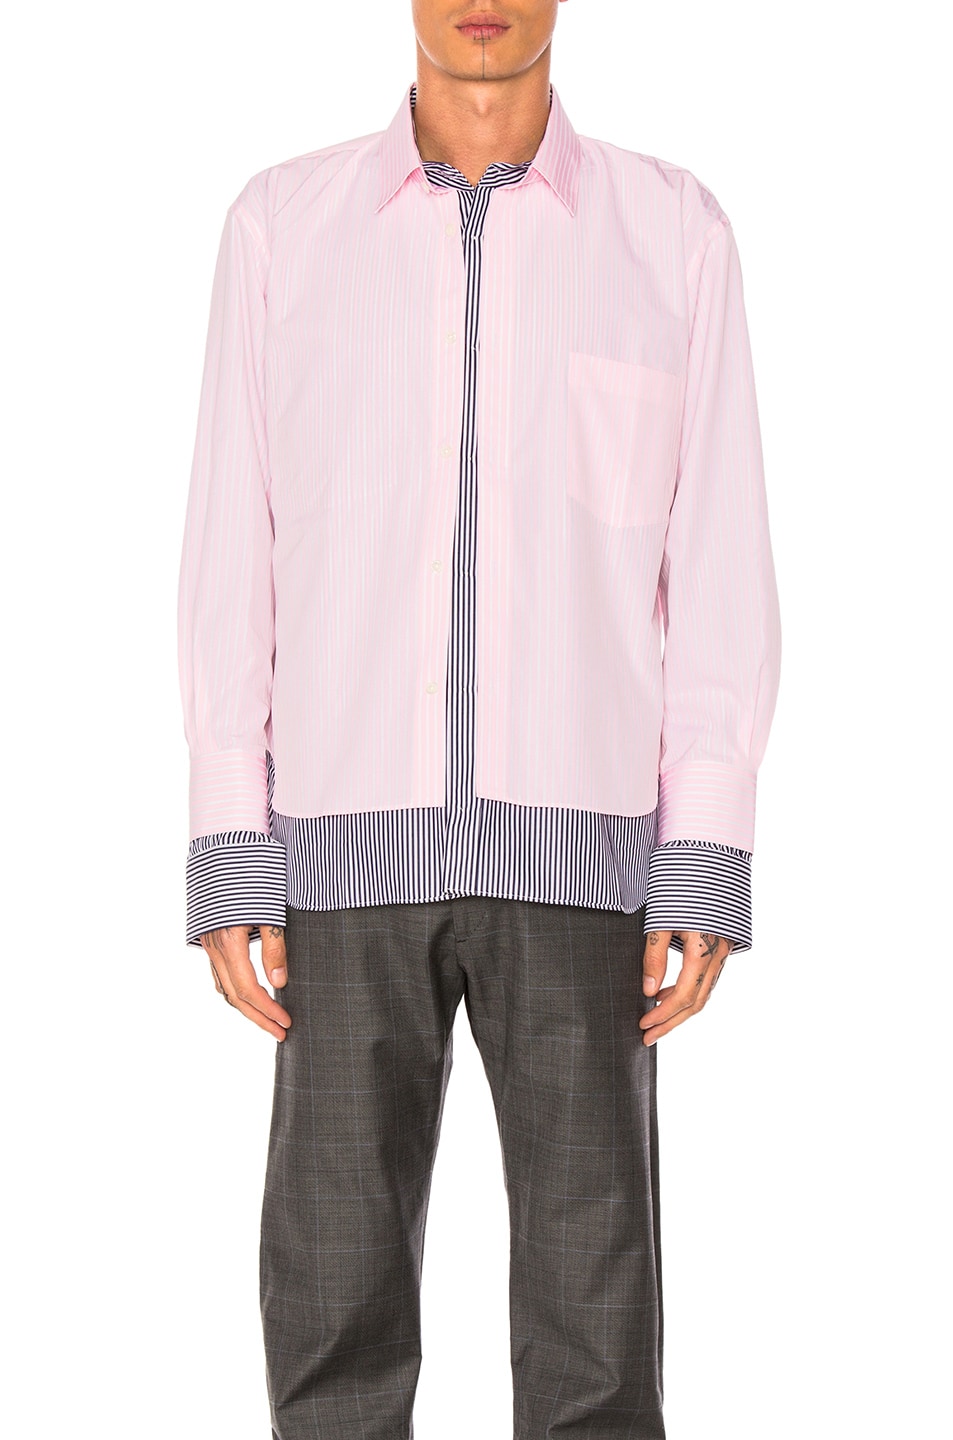 Image 1 of VETEMENTS x Comme Des Garcons SHIRT Shirt in Pink & Navy Stripe